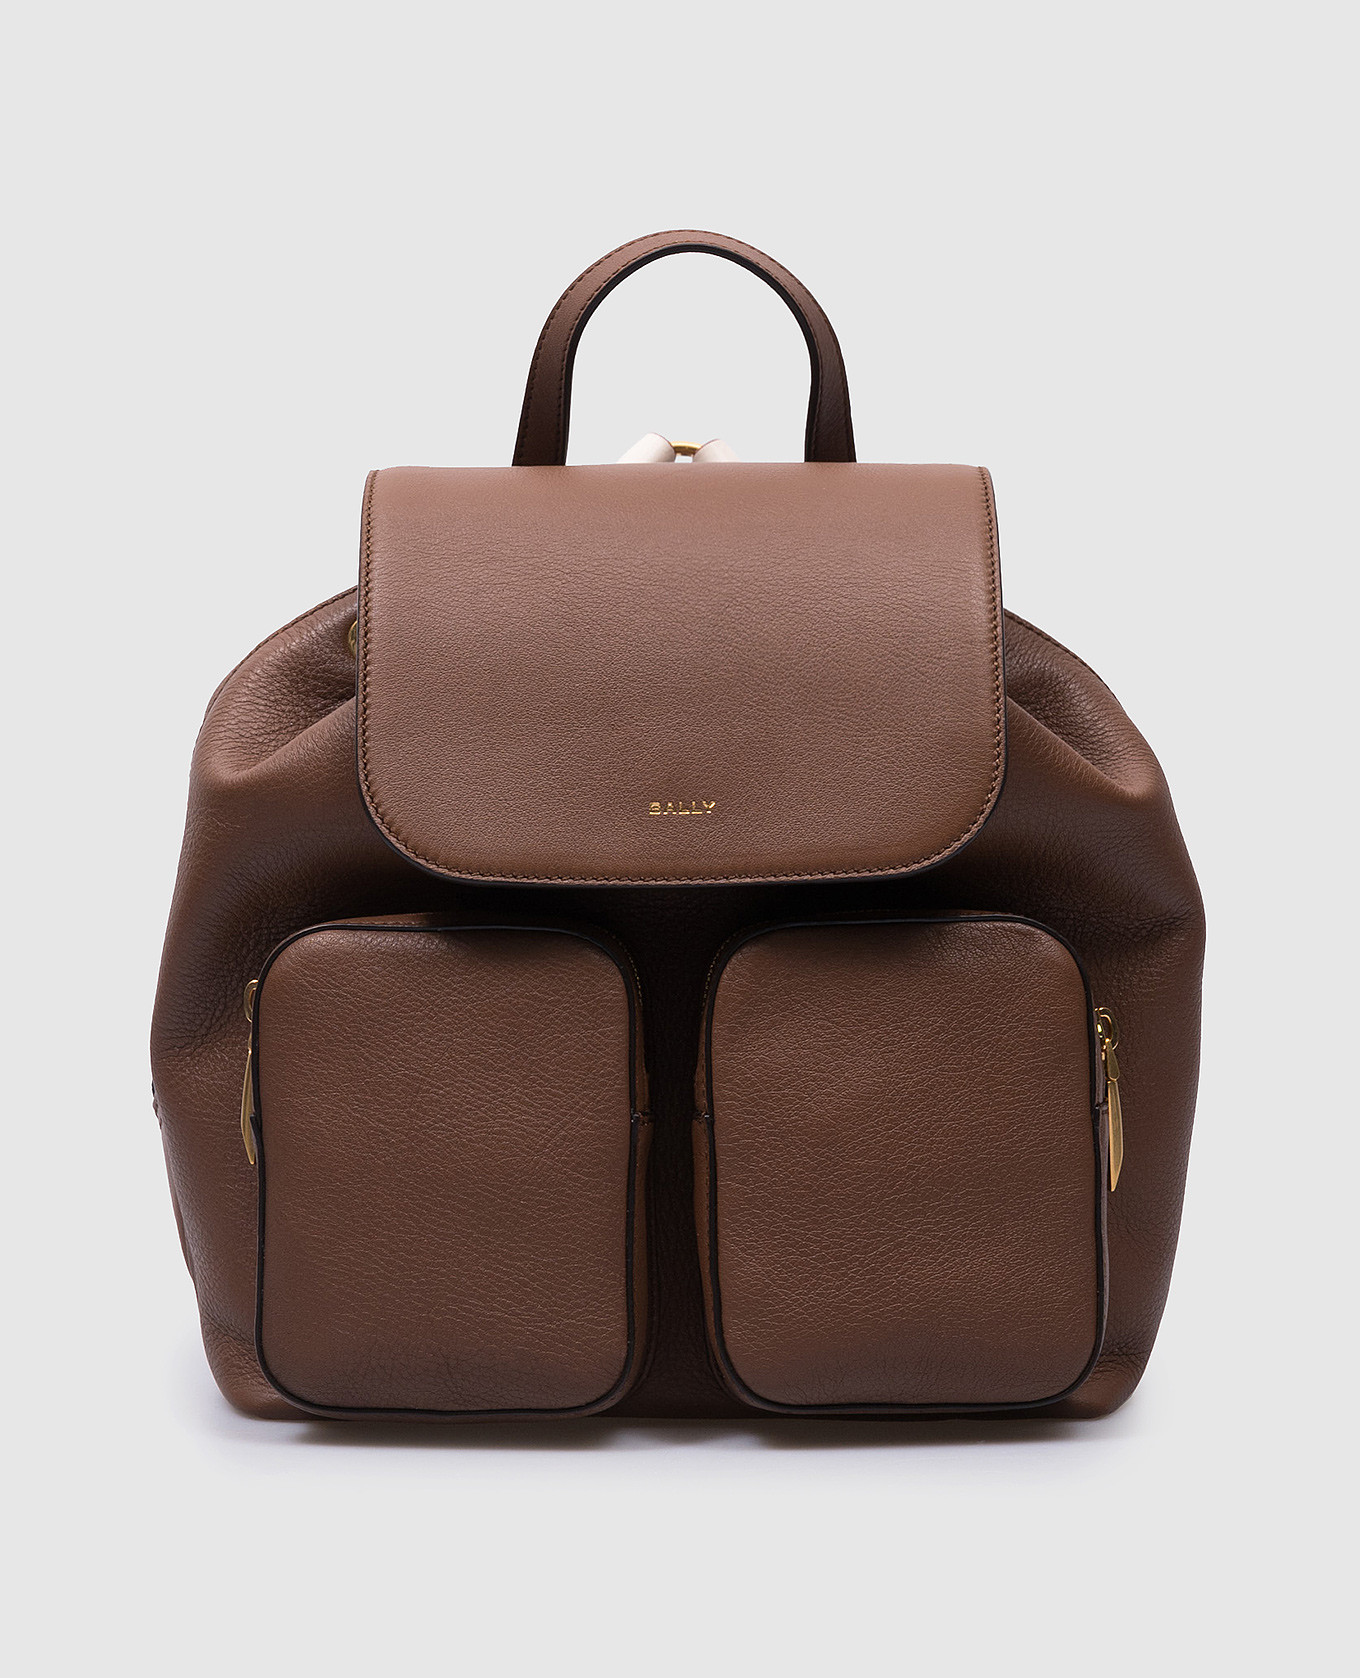 Brown leather backpack with logo